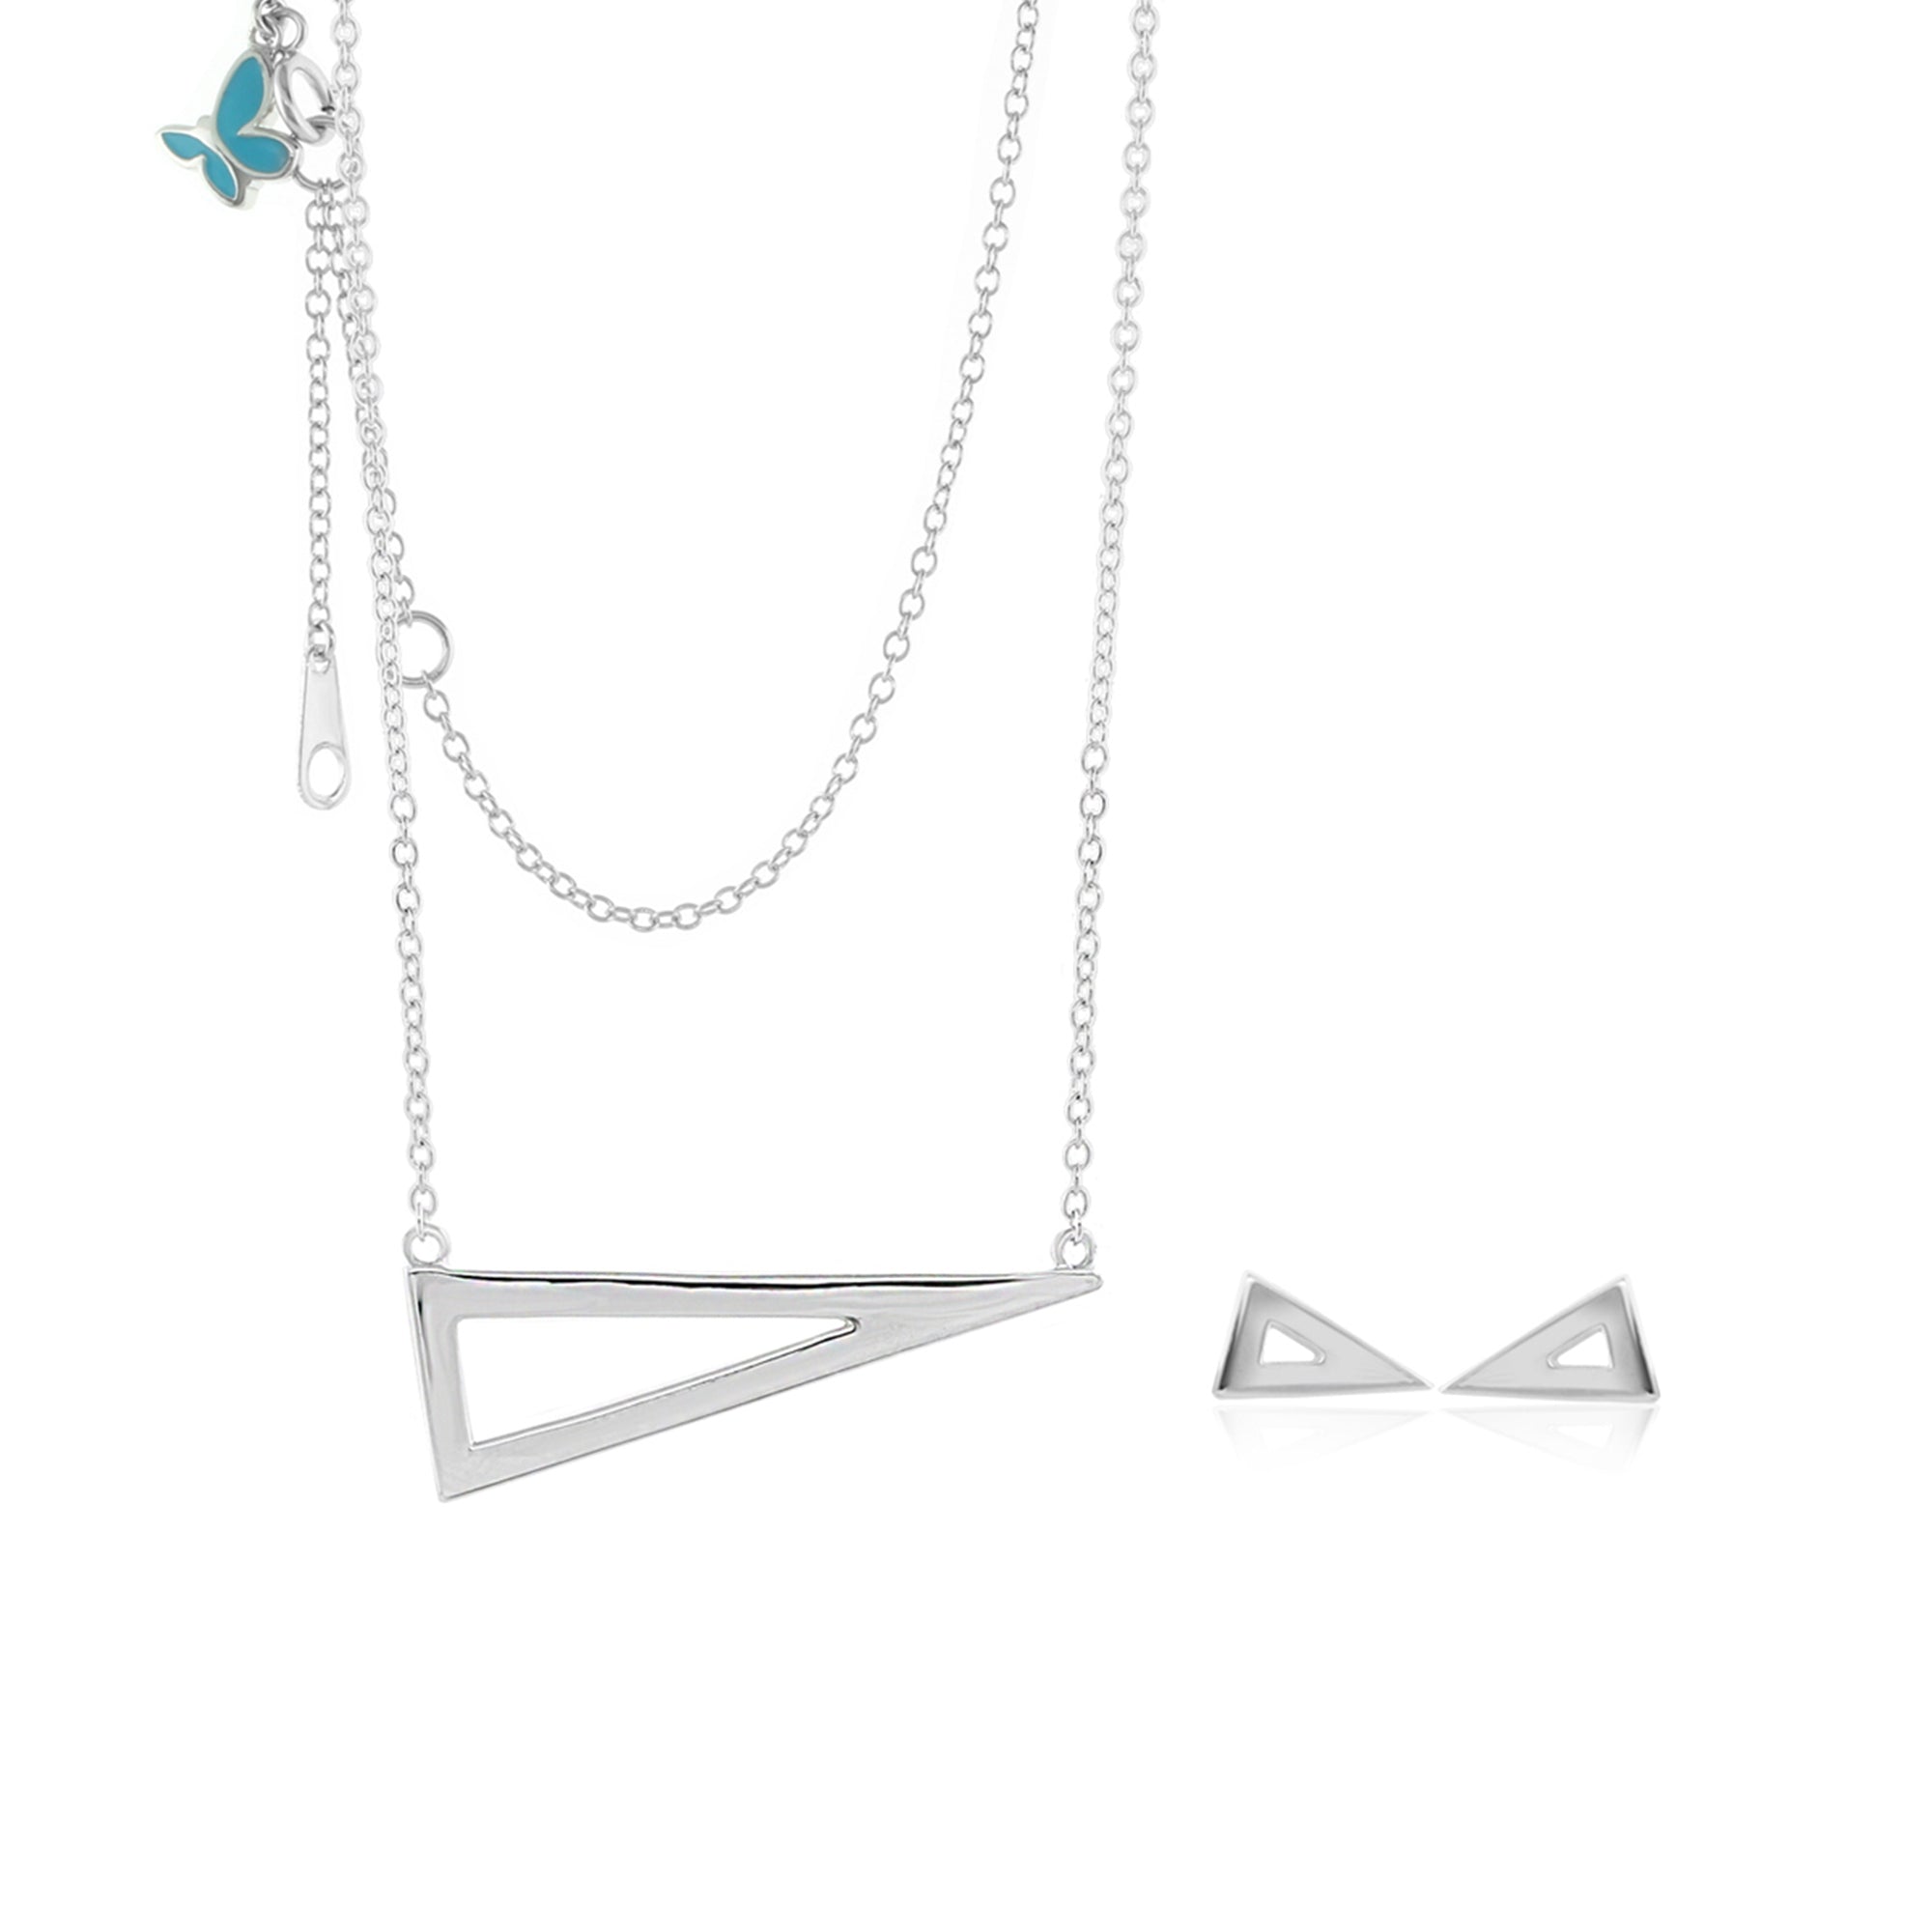 Sydney Leigh Triangle Necklace & Earrings Set